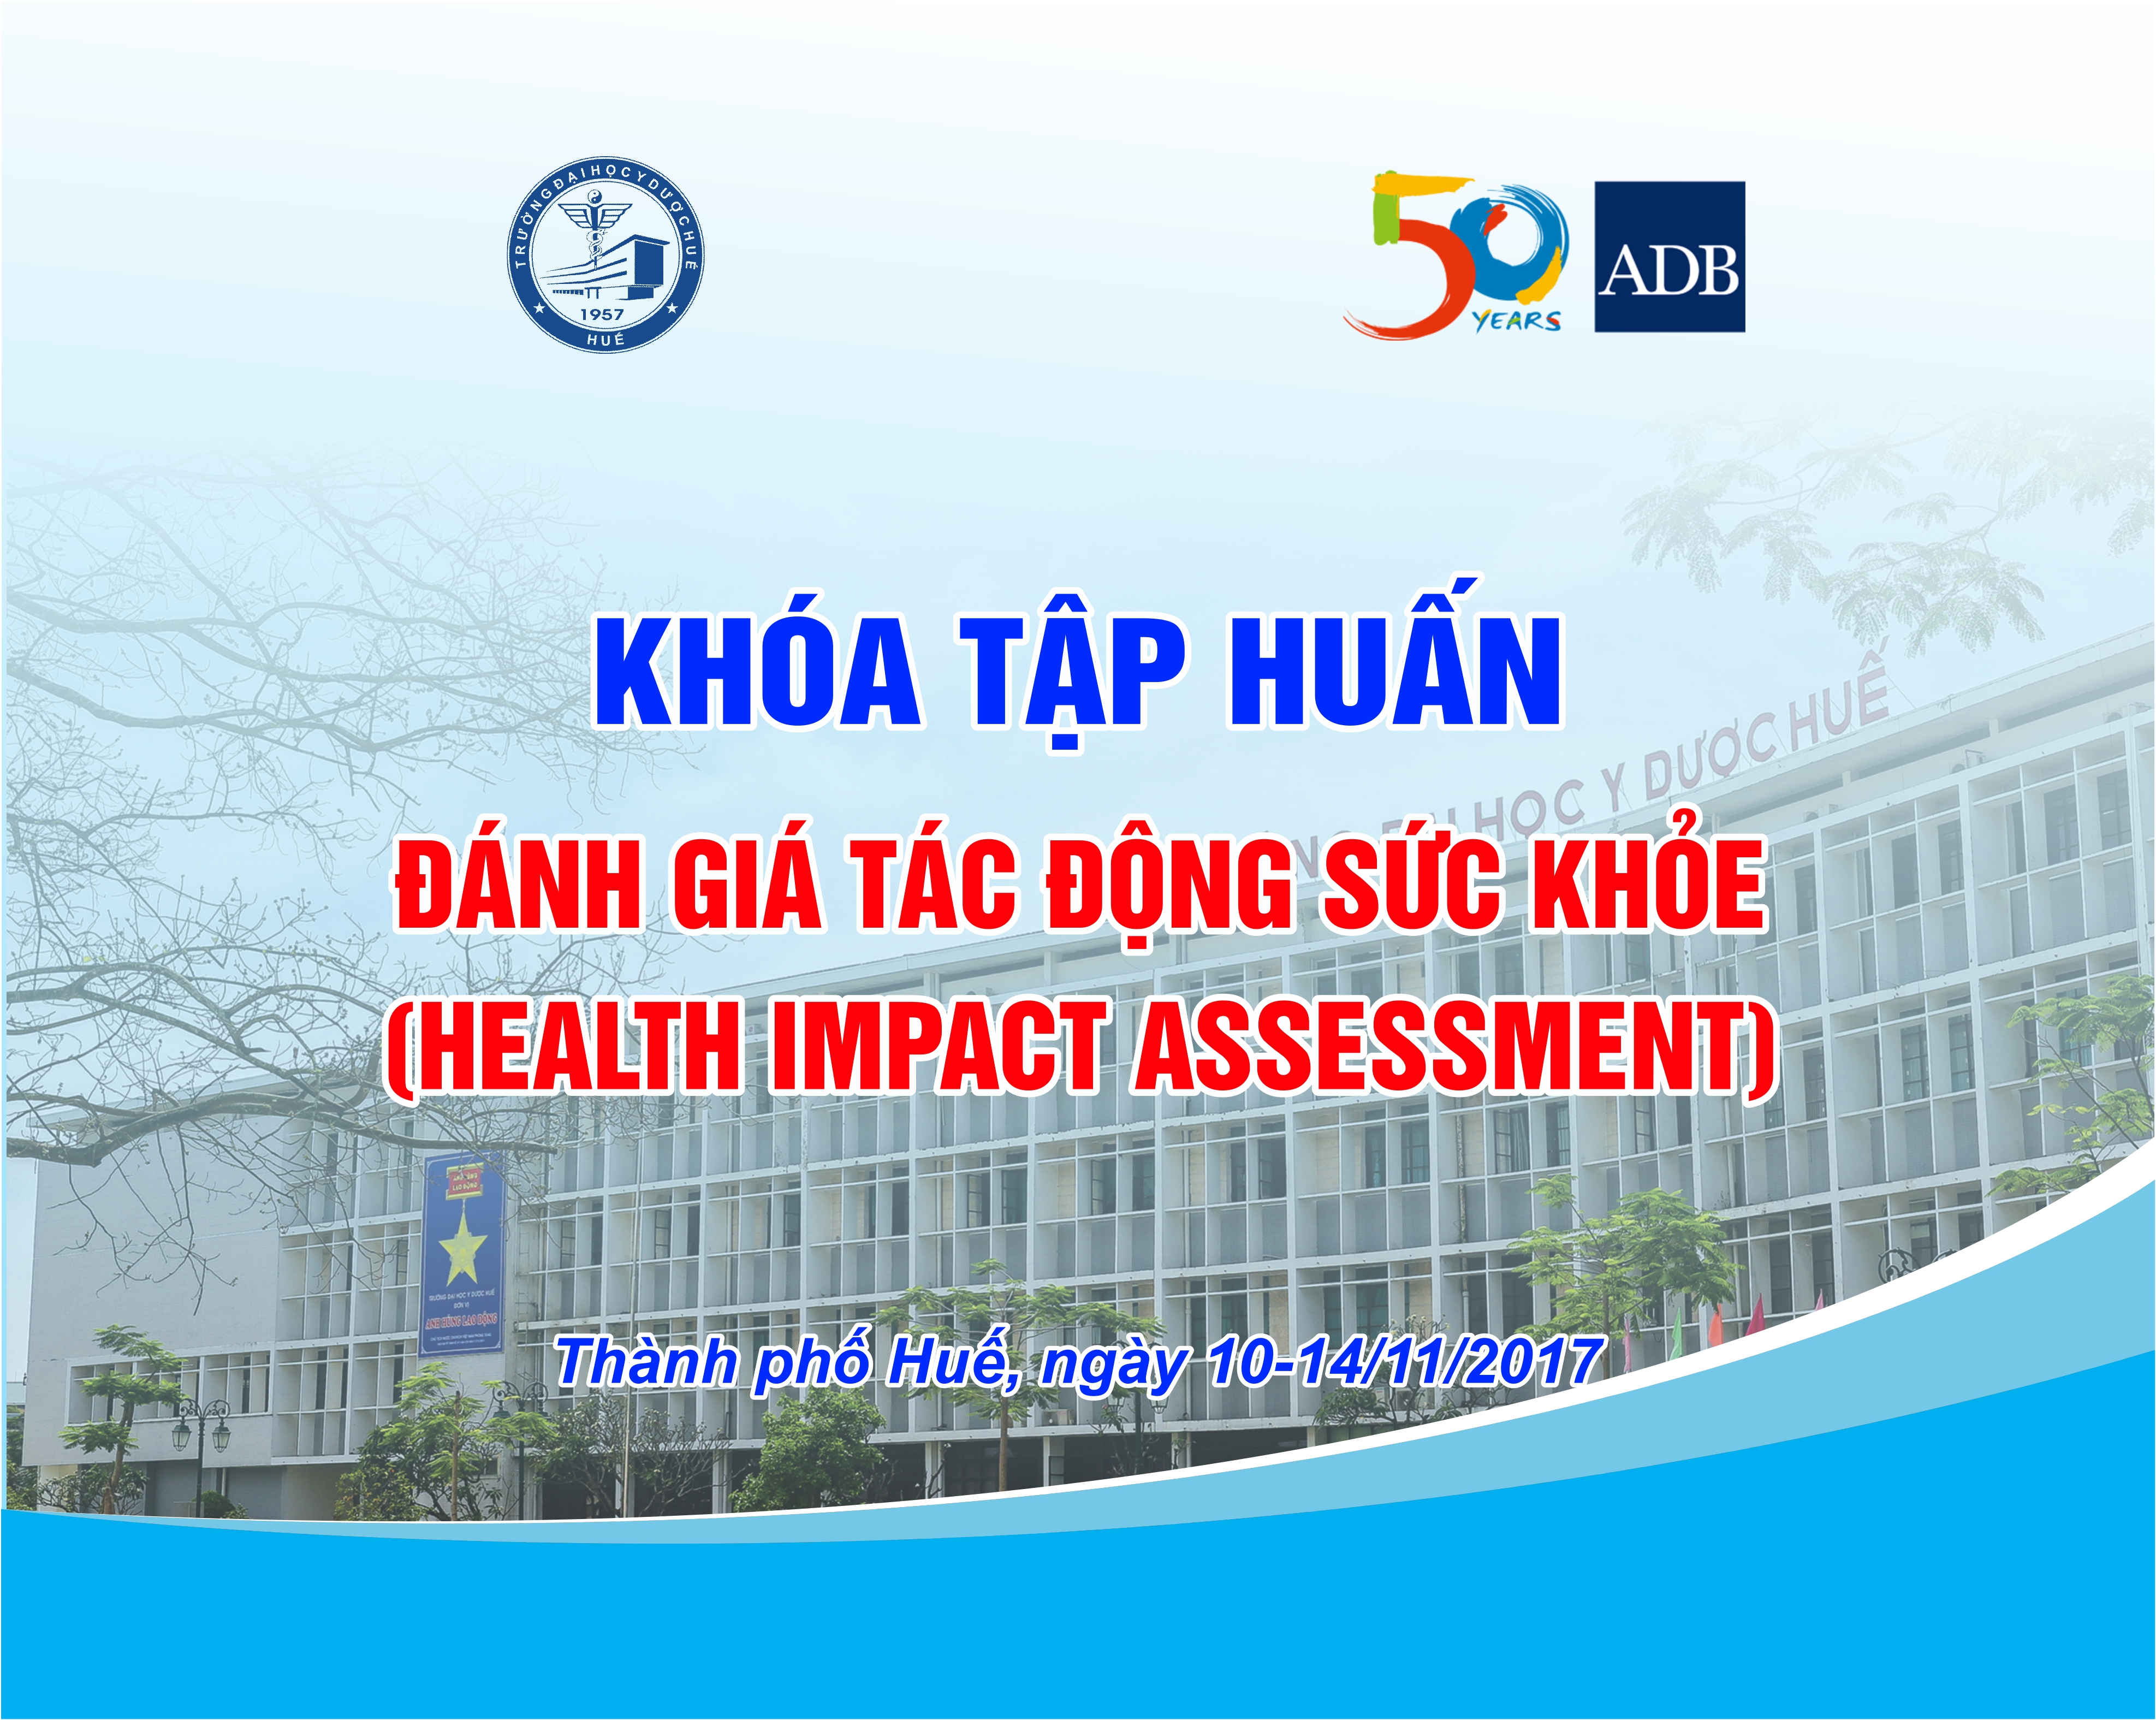 THE TRAINING COURSE "HEALTH IMPACT ASSESSMENT" IN HUE